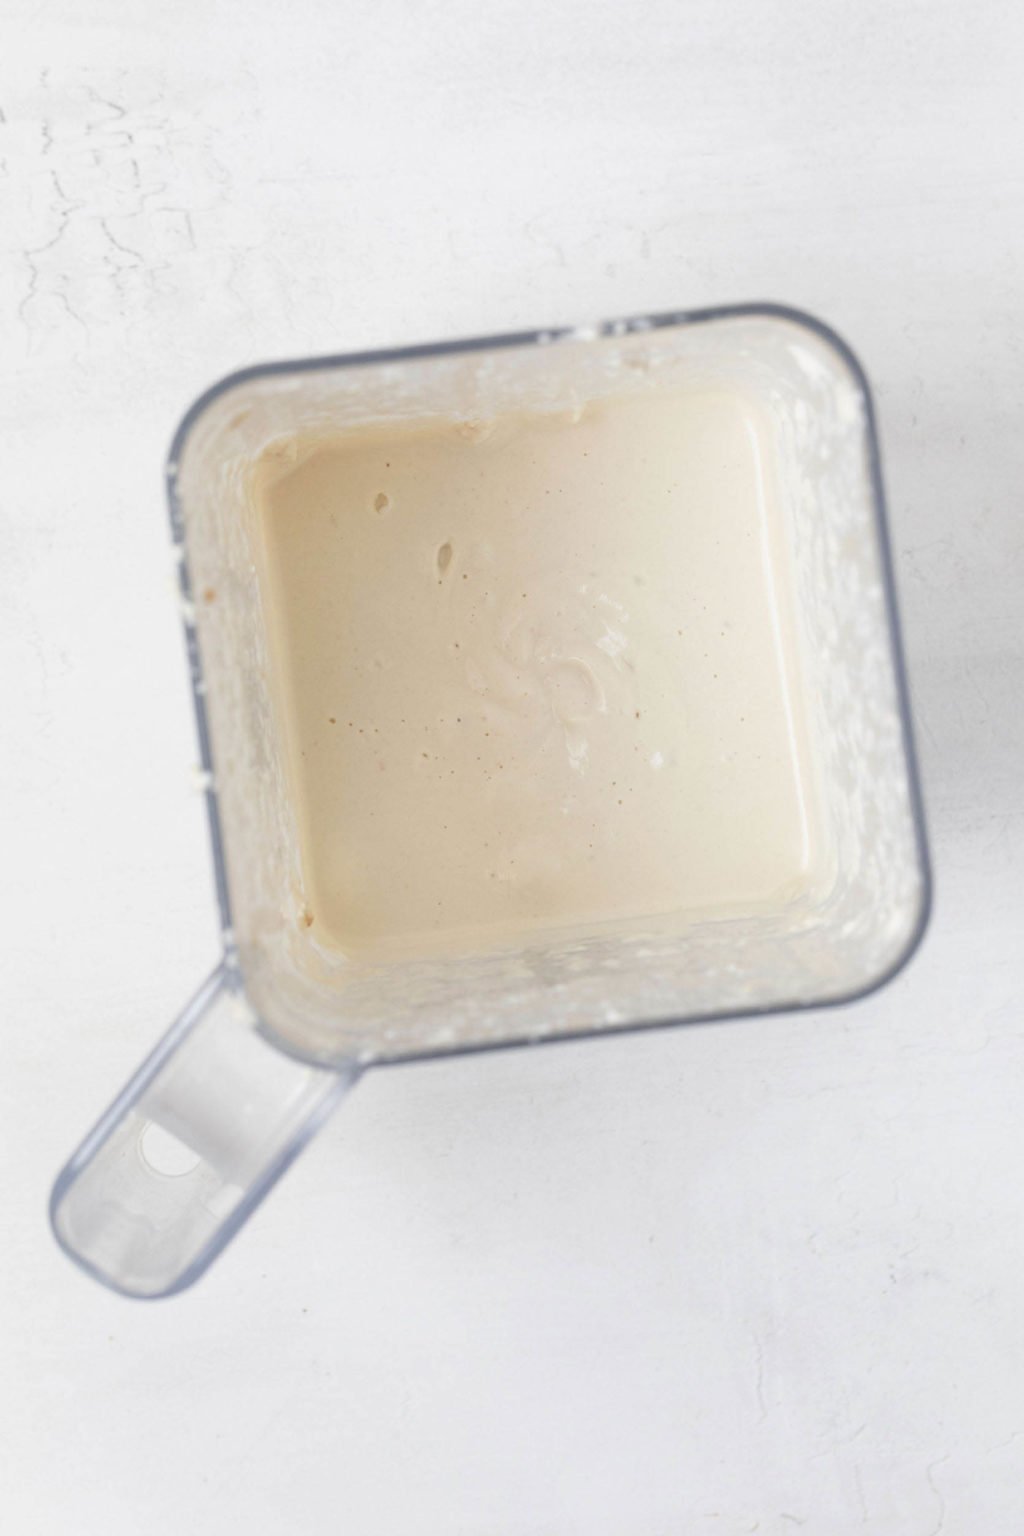 An overhead image of a blender, filled with a creamy white mixture.